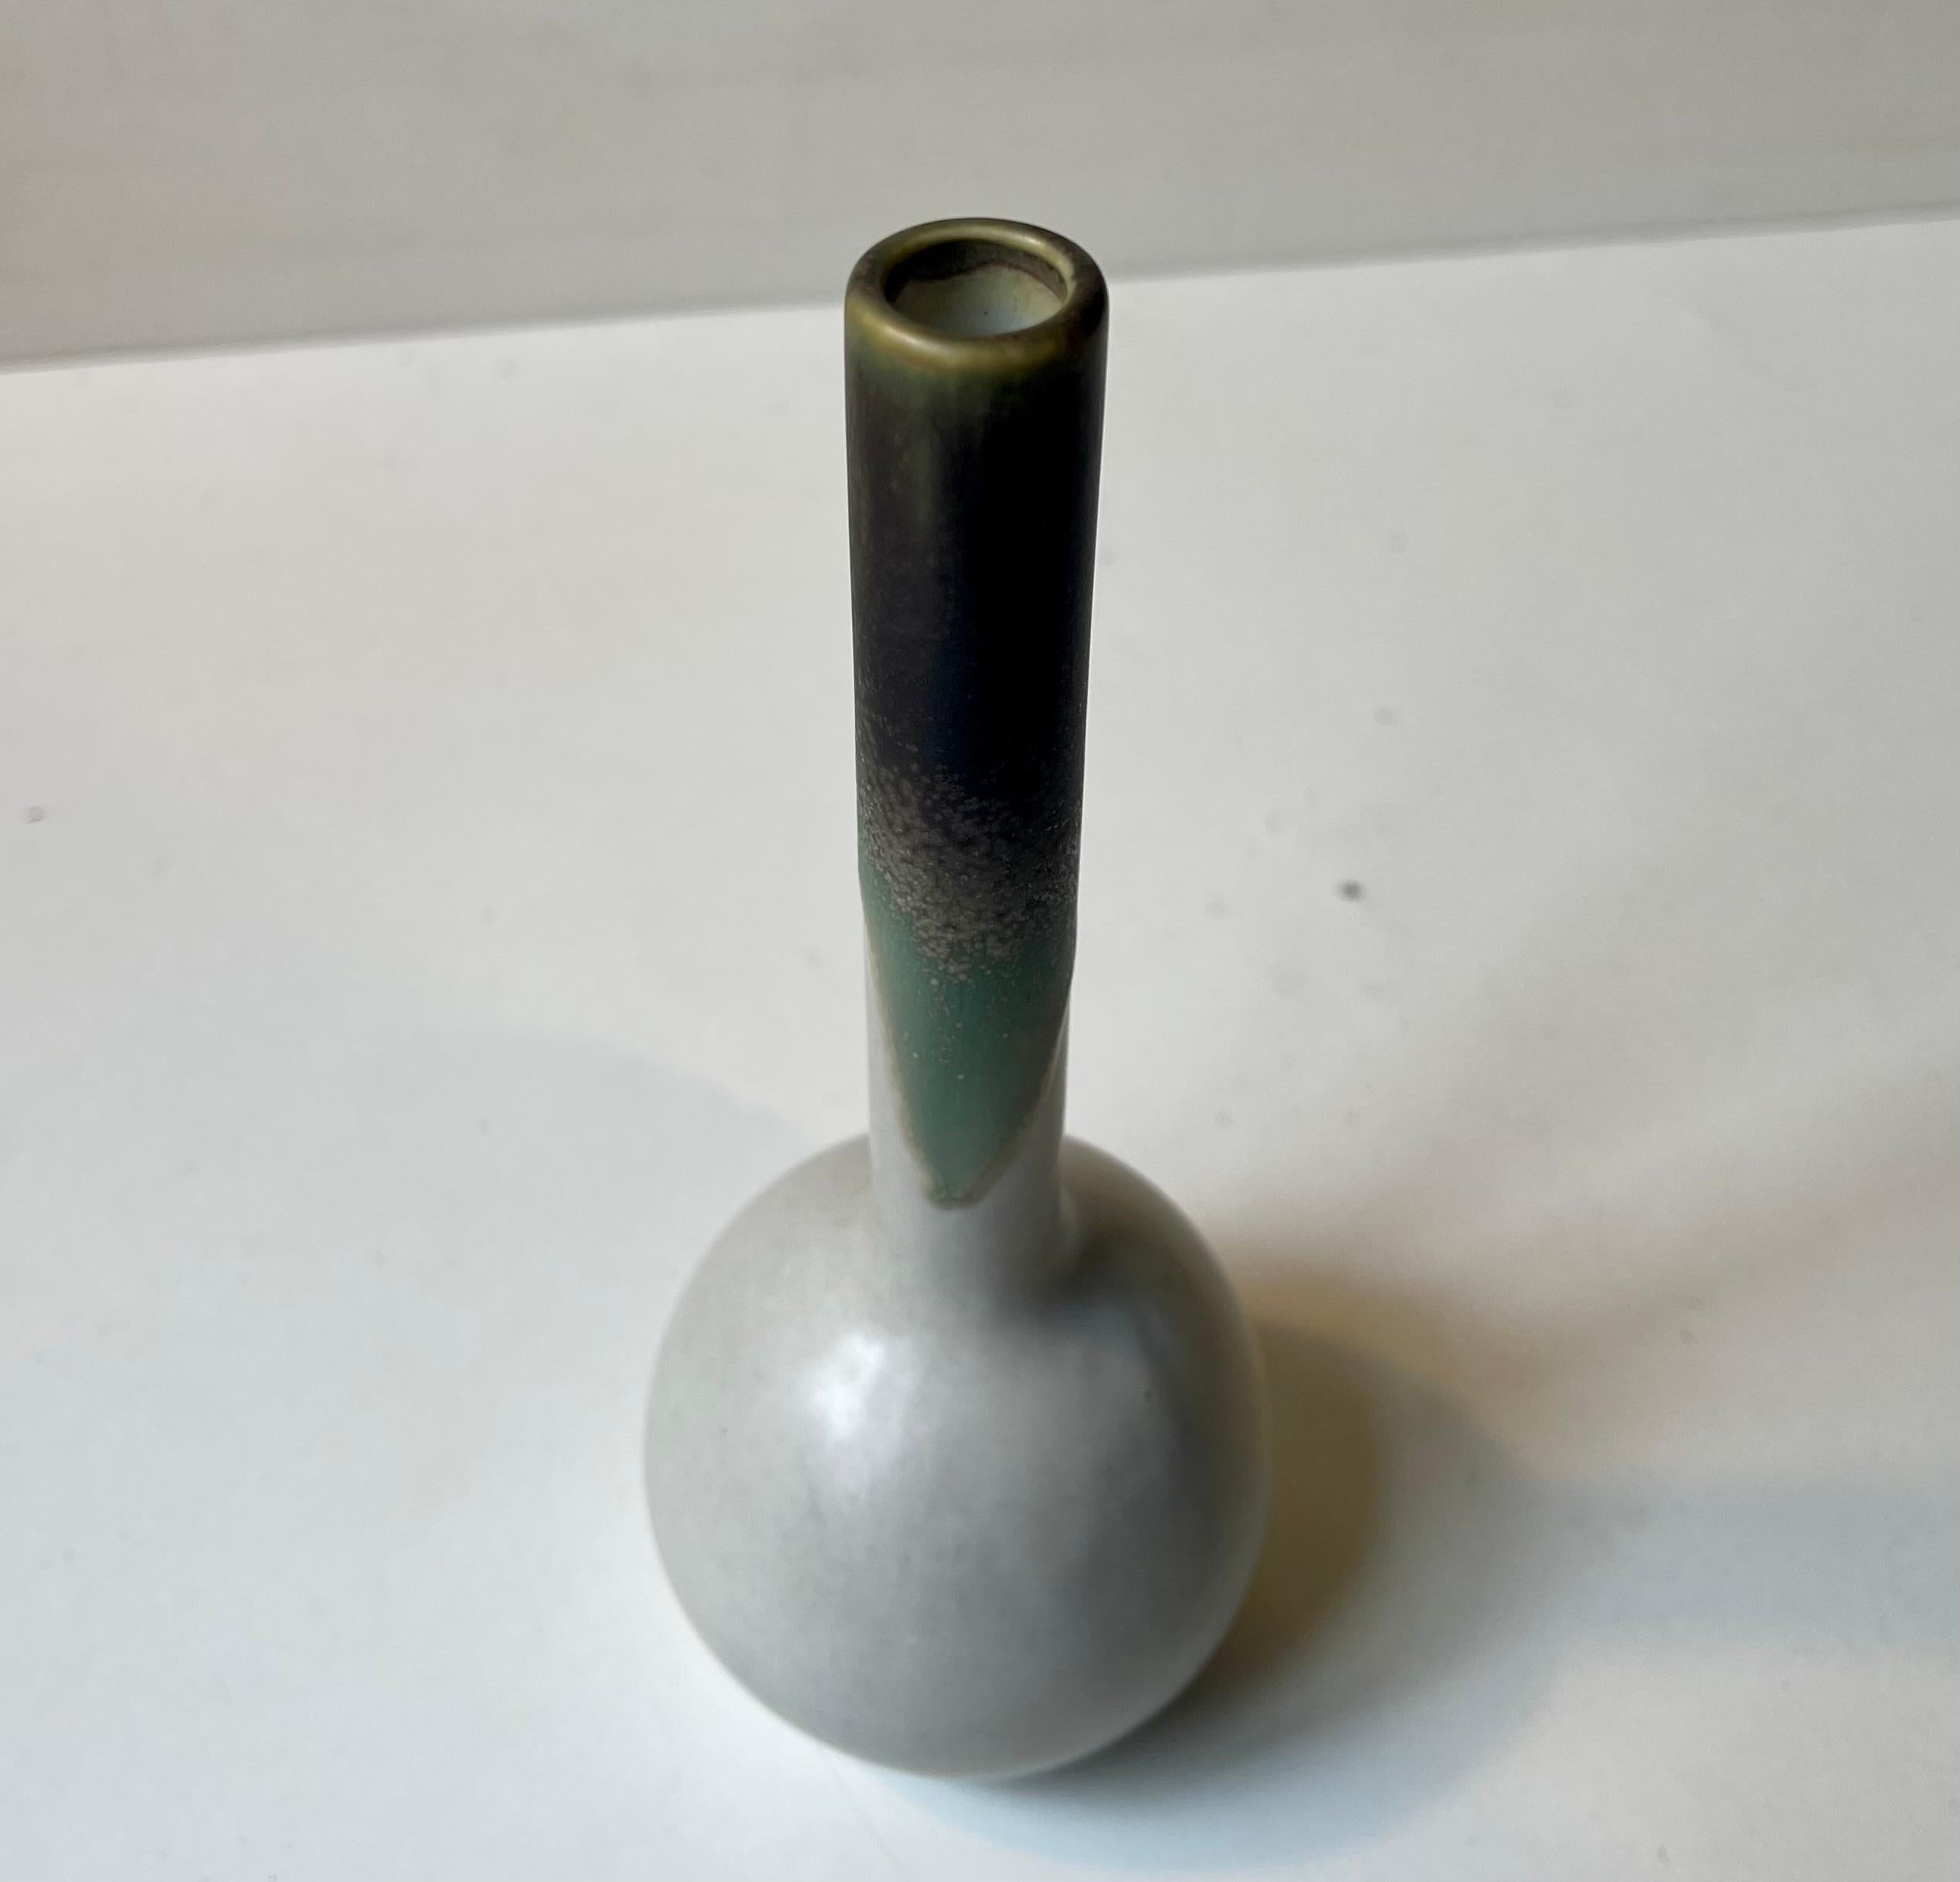 Small long neck ceramic vase decorated with green and brown earthy drip glazes. Dessin 3037 by Peter Müller for Sgrafo Atelje in Germany circa 1970. Reminiscent in style to Franchi Assisi. Measurements: H: 18,5 cm, D: 8 cm at it widest point.